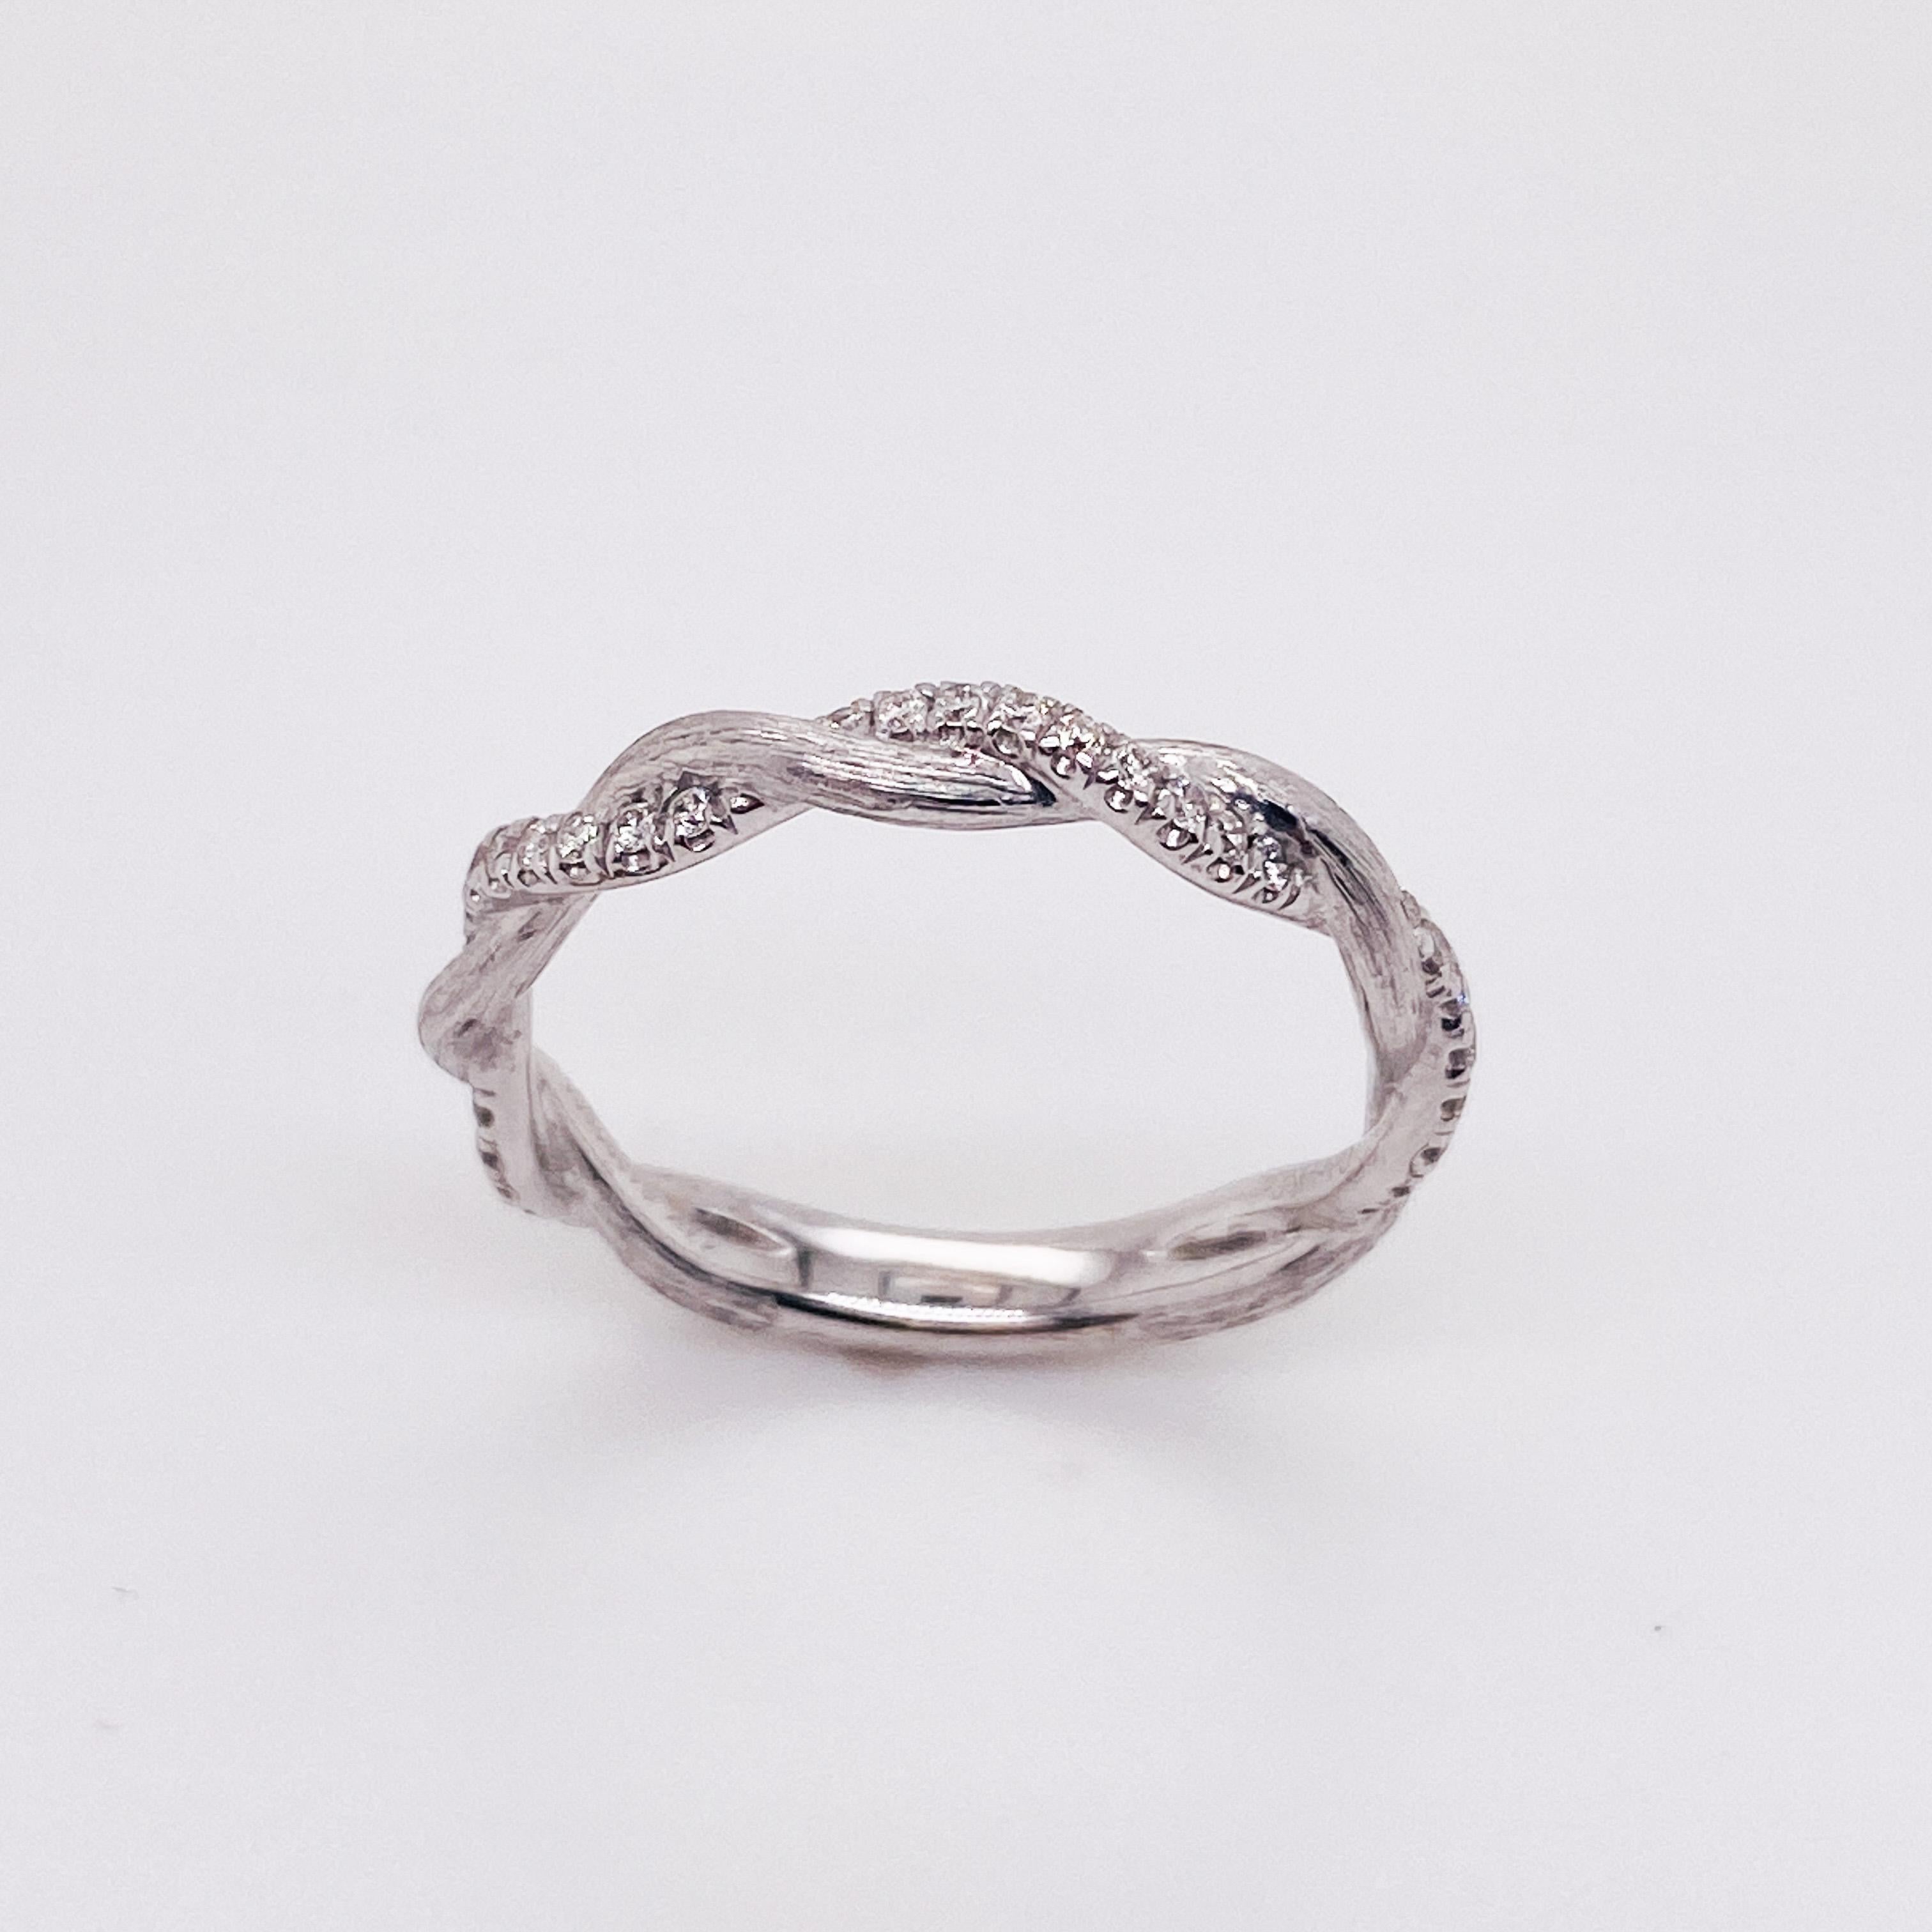 For Sale:  Diamond Twist Satin Finish Band in 14k White Gold .20 Carat Stackable Ring 3